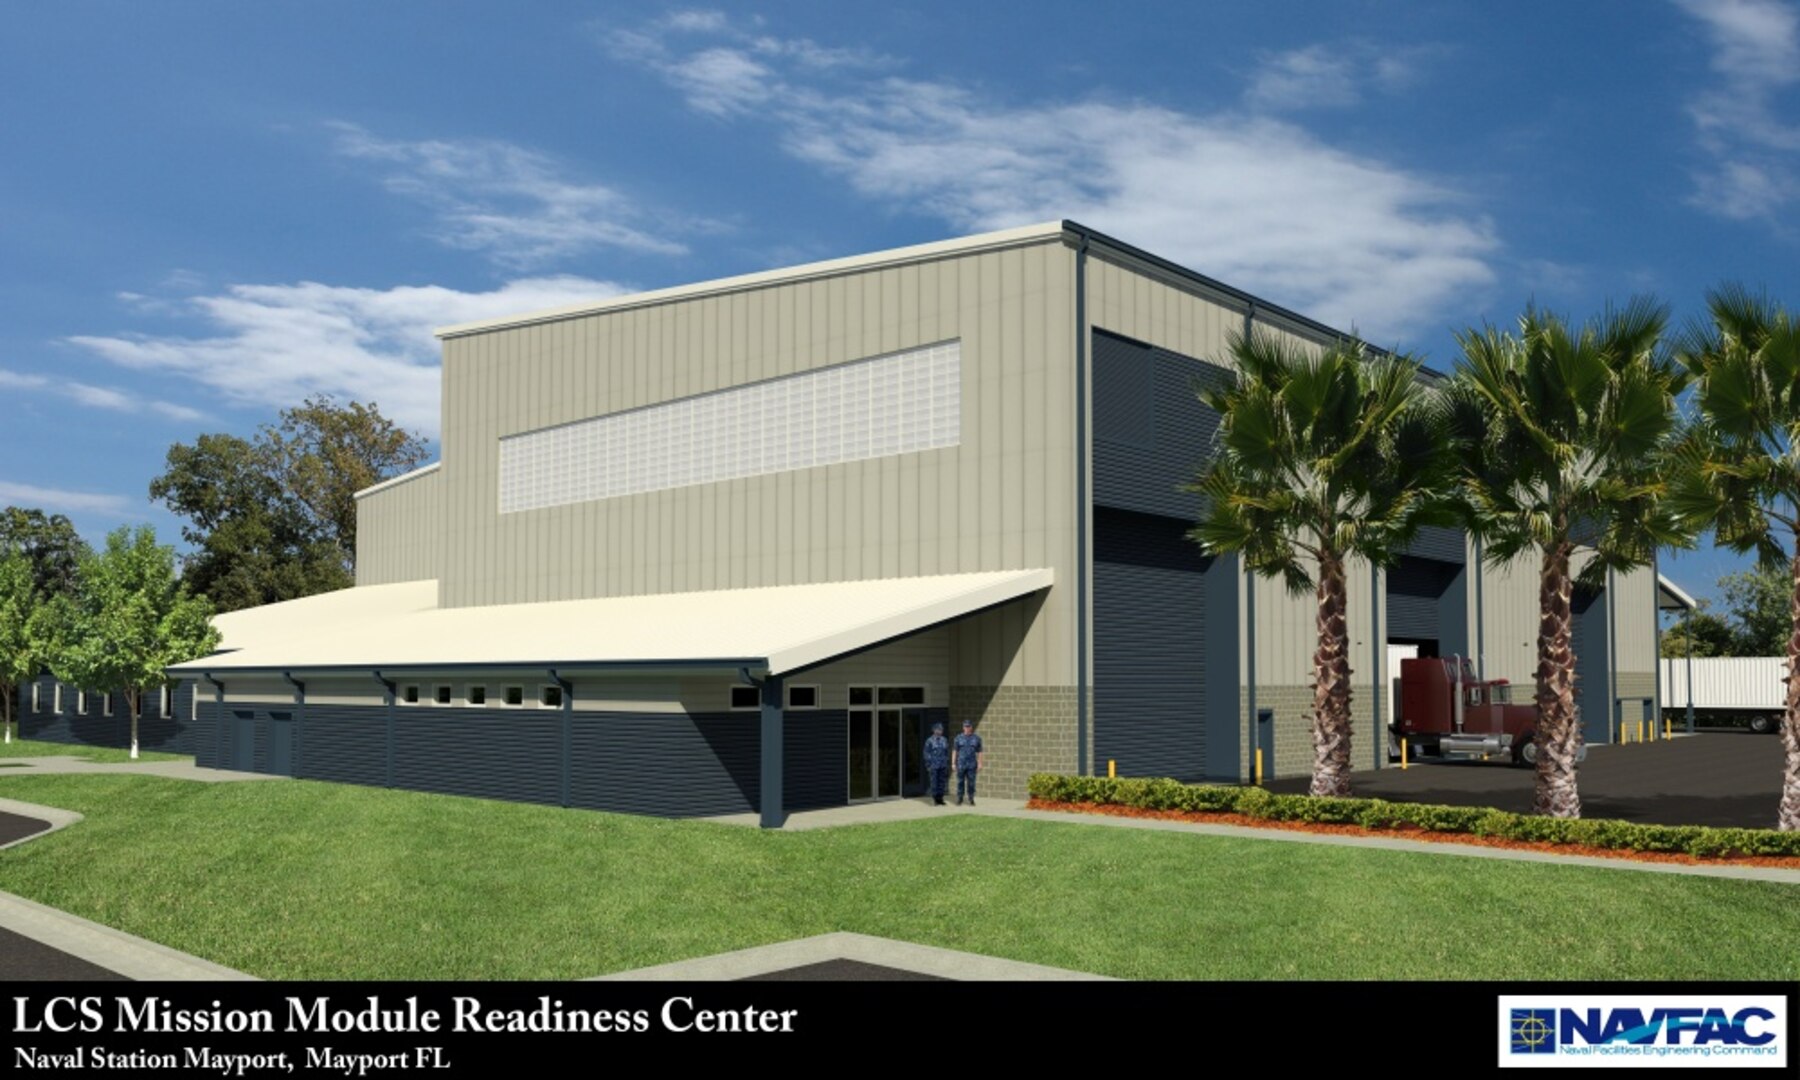 Pictured is an artist rendering of the Littoral Combat Ship Mission Module Readiness Center currently under construction in Mayport, Fla.